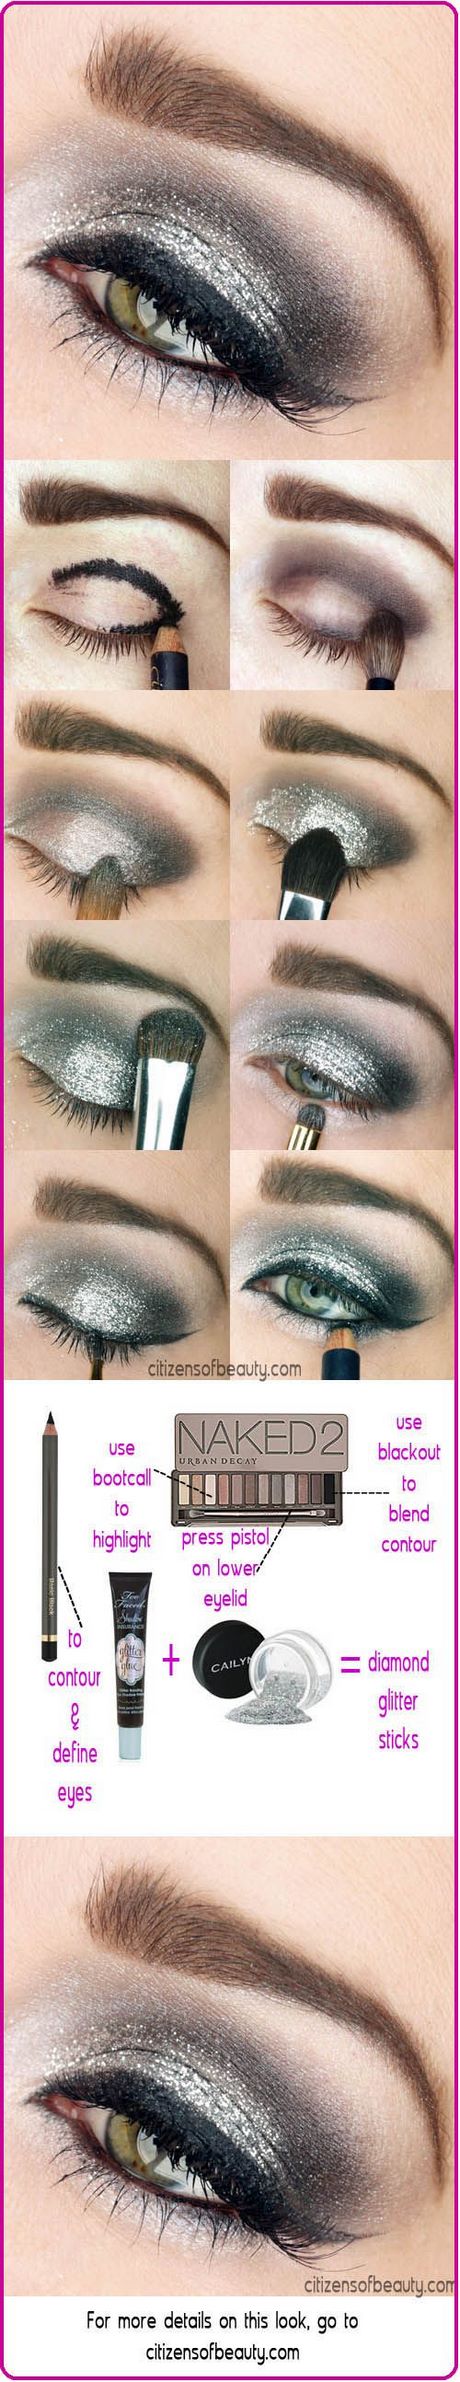 2022-new-years-eve-makeup-tutorial-10_6 2022 new years eve make-up tutorial